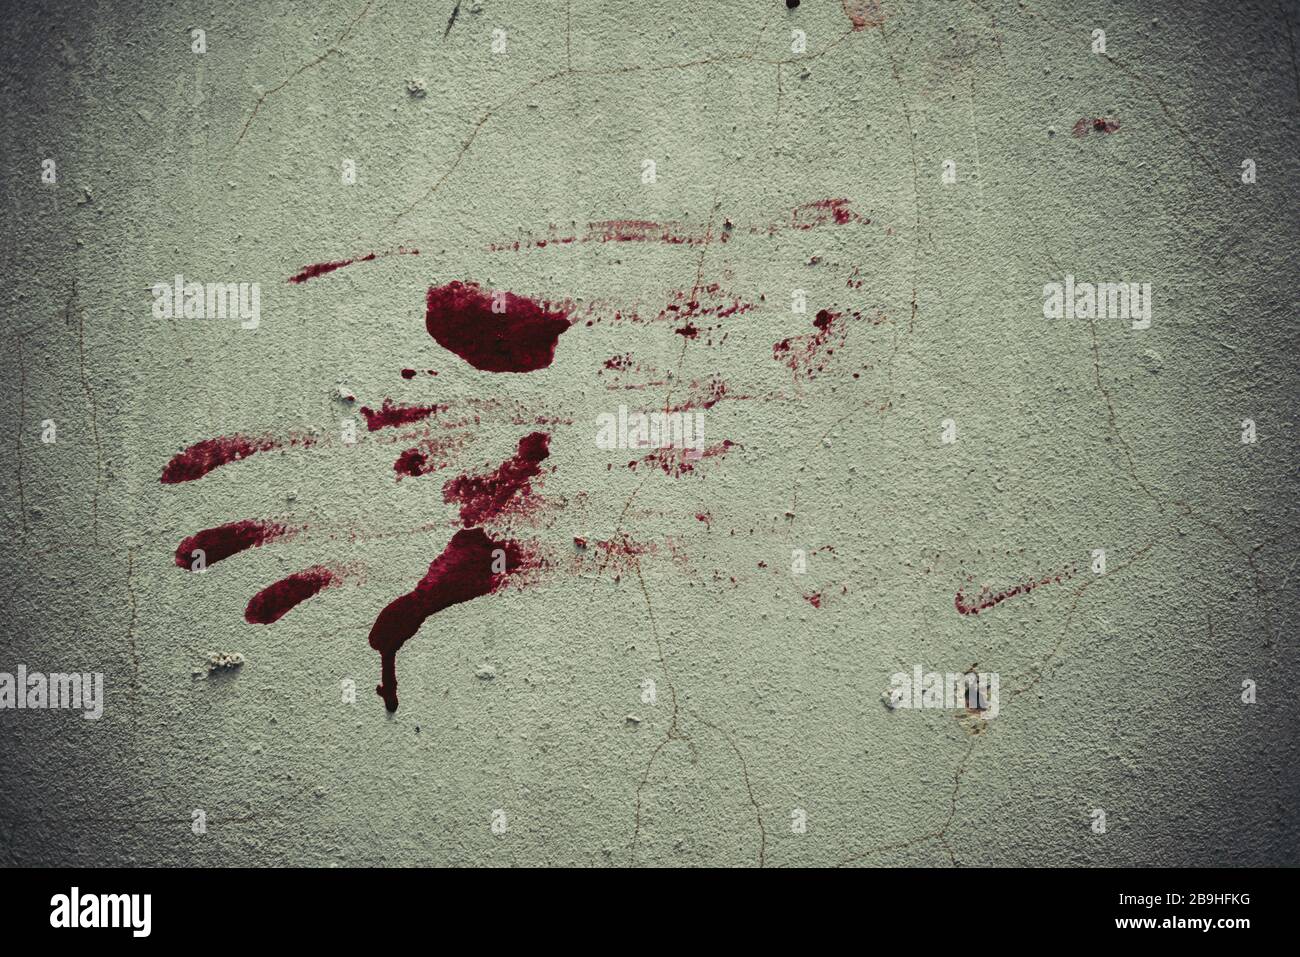 Red blood like hand shape stuck on the grunge wall background in abandoned house. Halloween haunted scene and spooky concept. Stock Photo